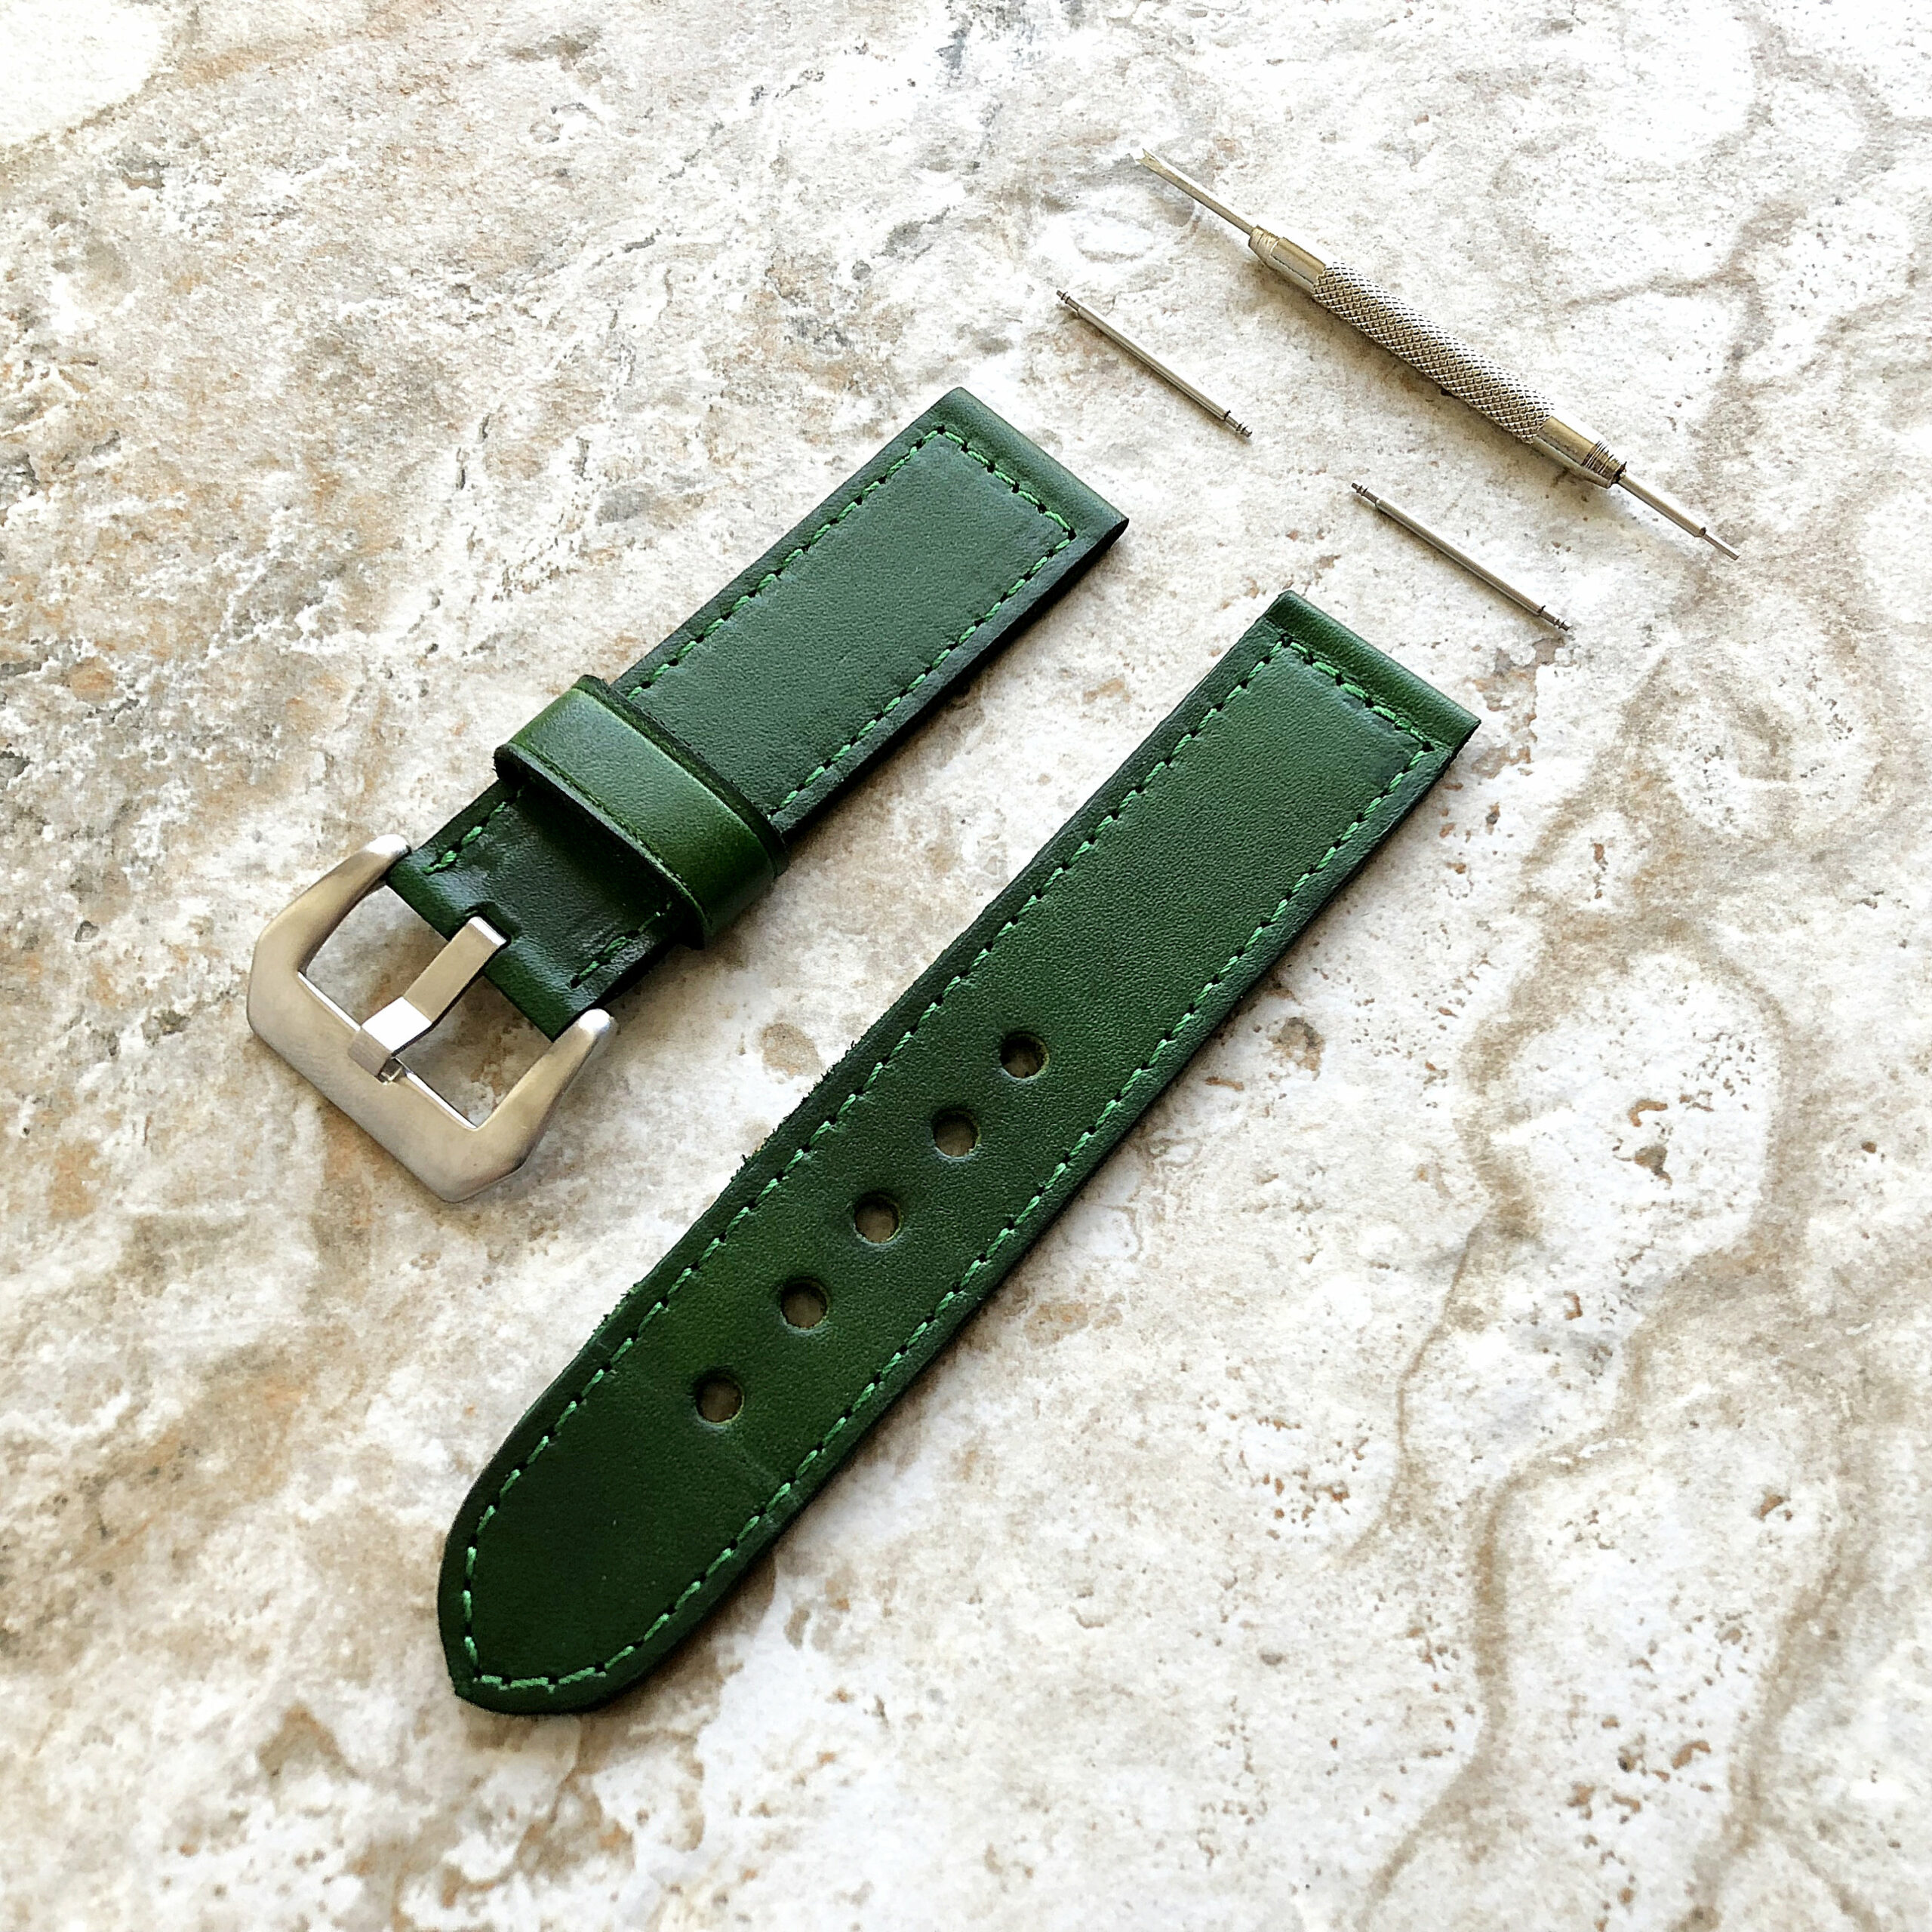 green color band for samsung galaxy watch active 2 40mm 42mm 44mm premium leather with stitches bracelet cuff wristband strap pins and tool 5ddf0f4b scaled